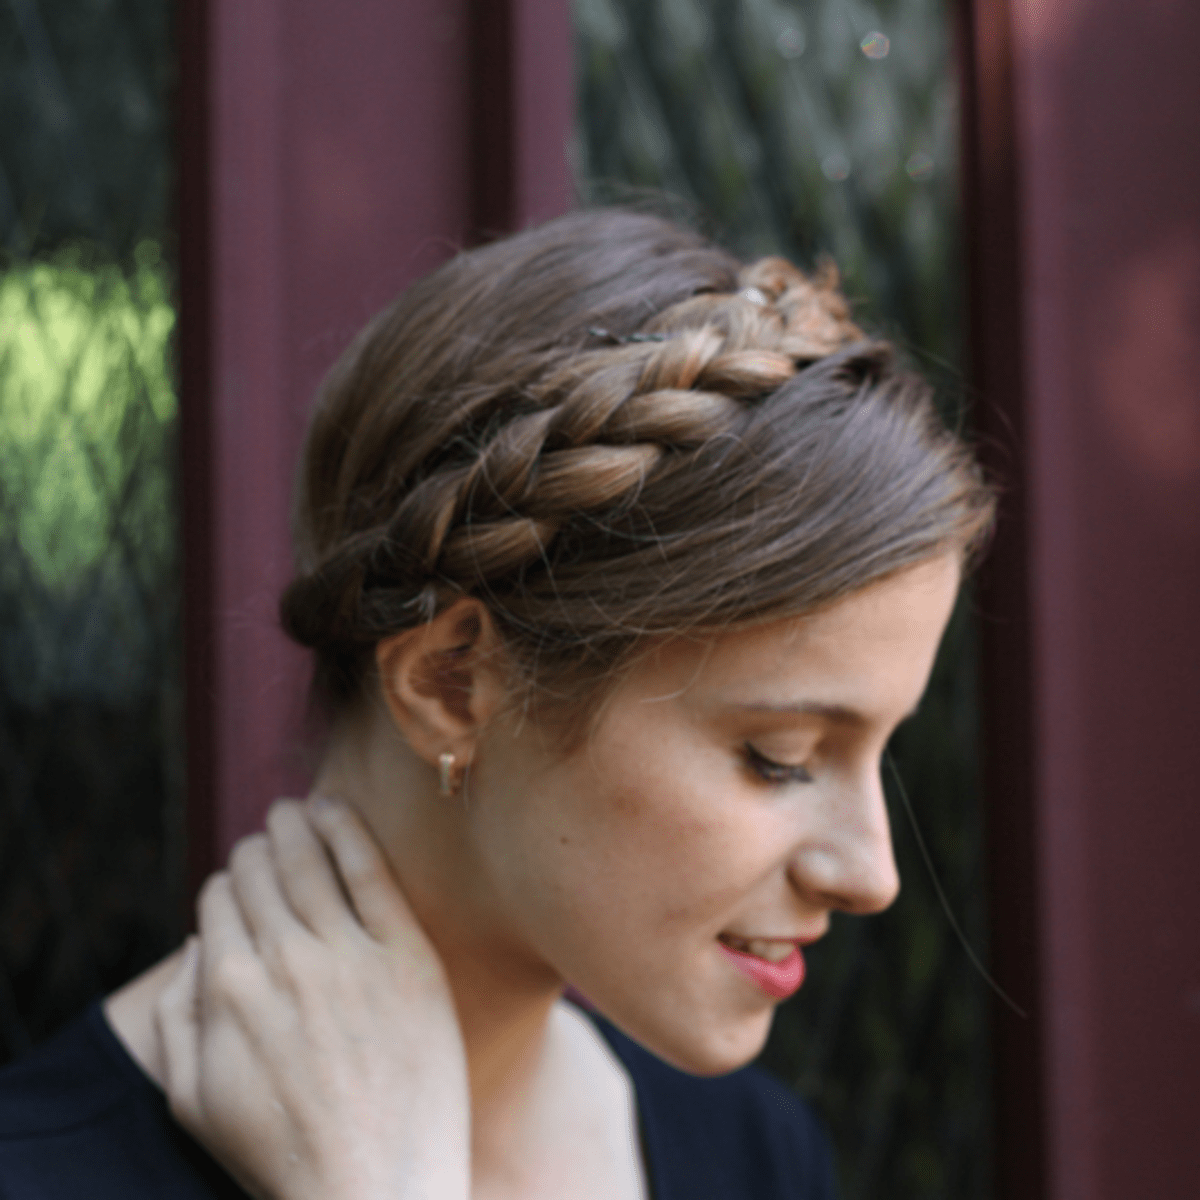 10 Quick And Easy Hairstyles For Updo Newbies Verily